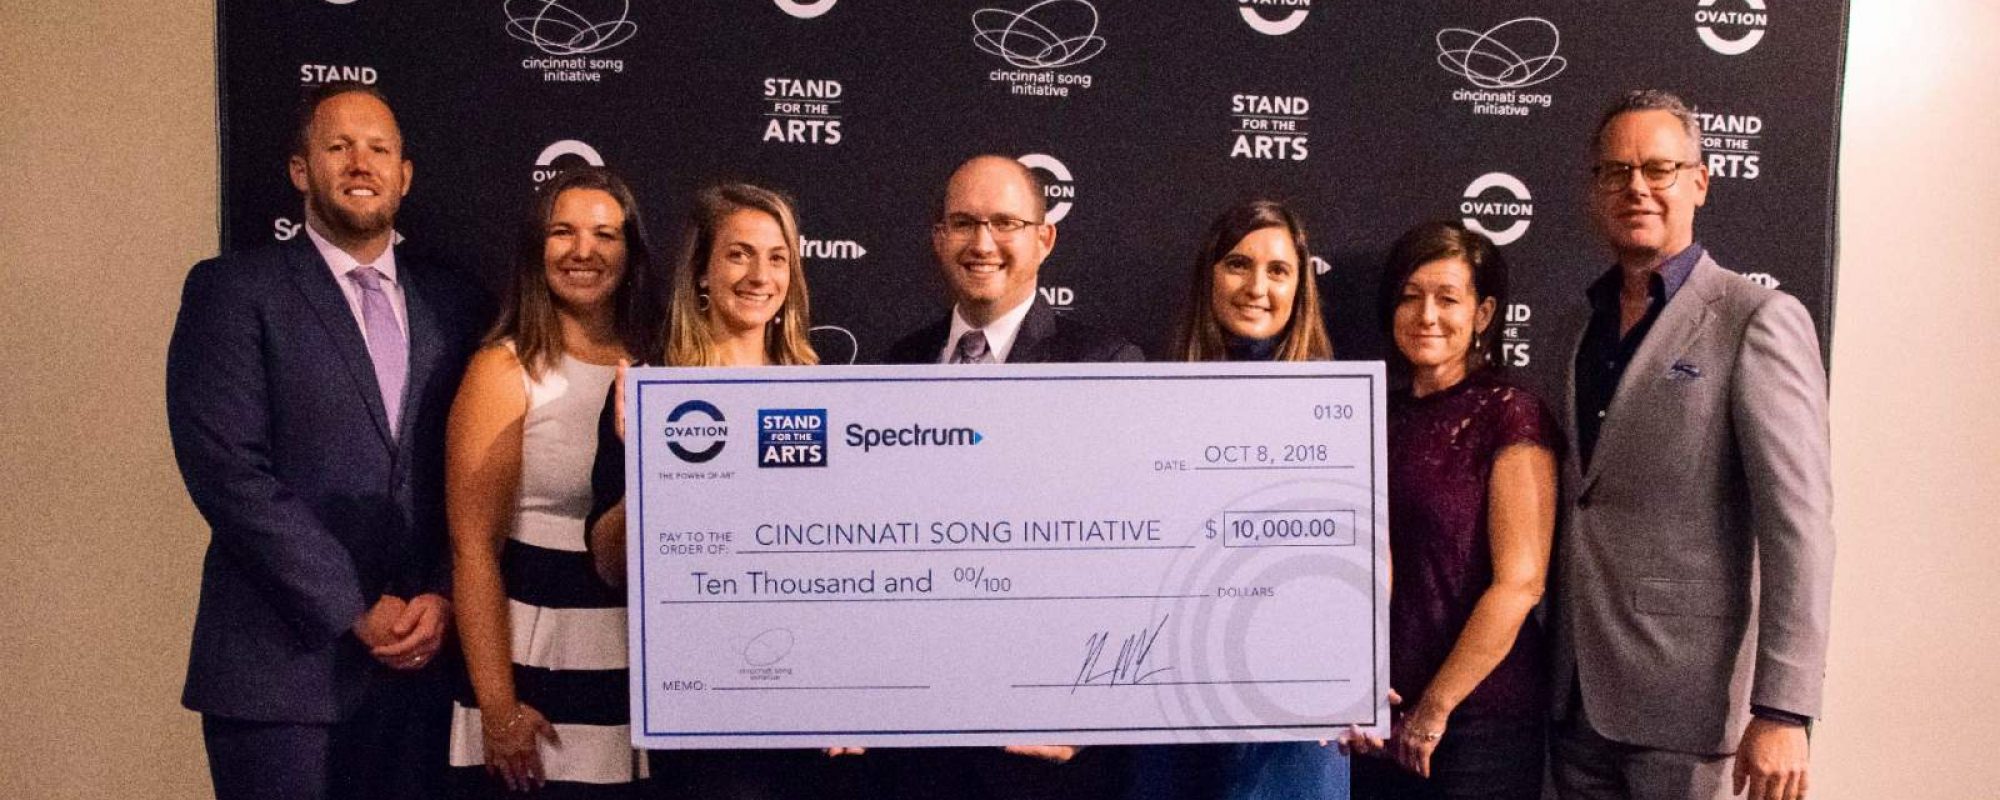 CINCINNATI SONG INITIATIVE RECEIVES 2018 STAND FOR THE ARTS AWARD